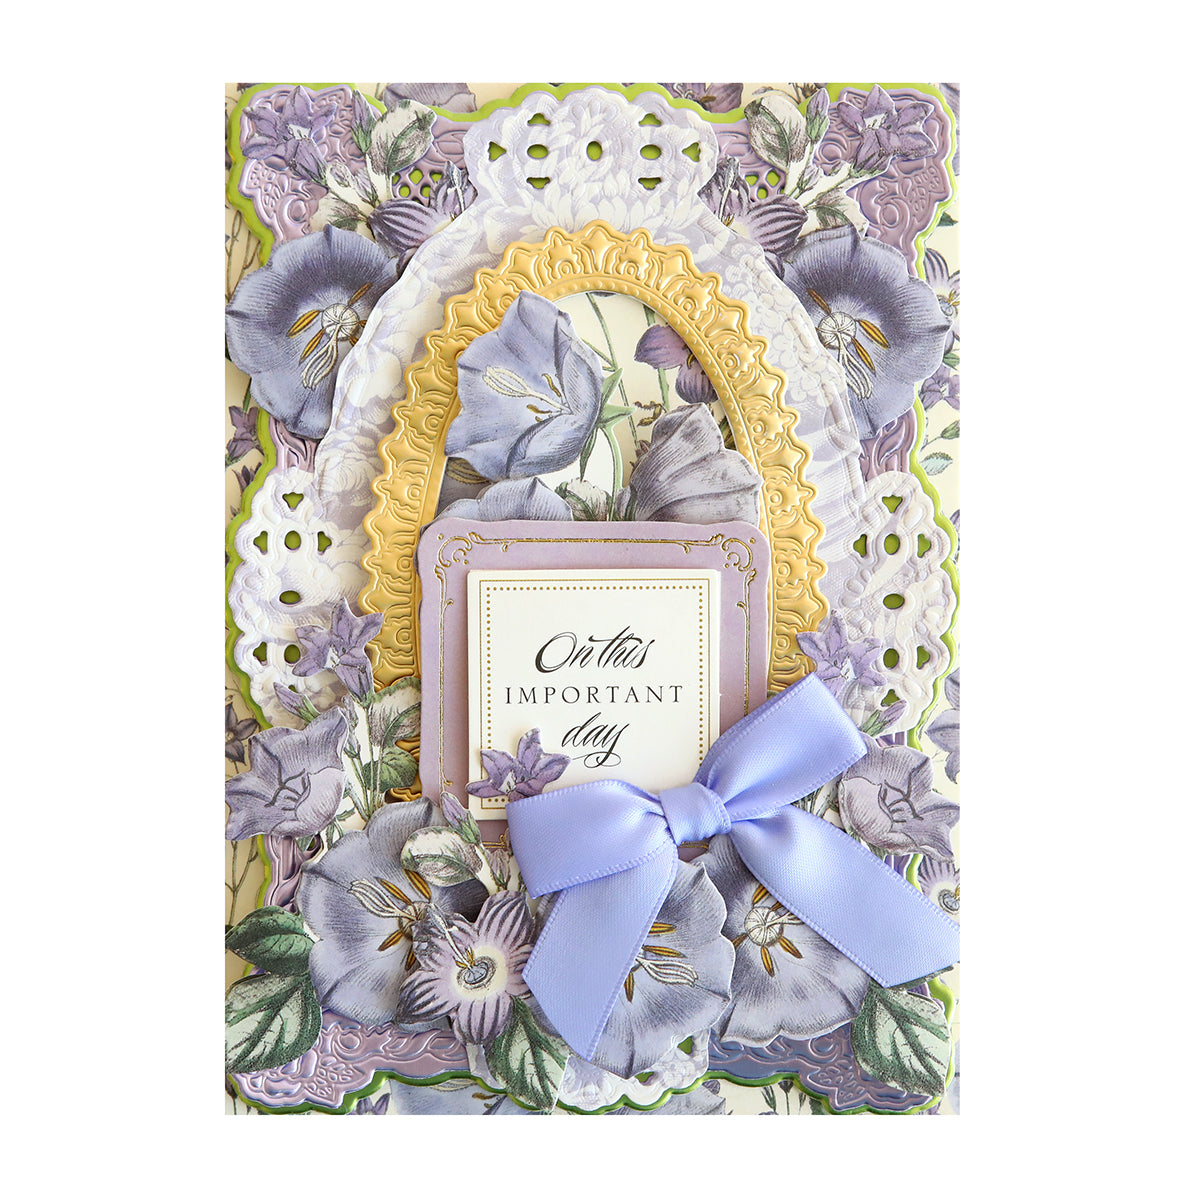 Anna's first designs include a card with purple flowers and a bow from the Anniversary Paper Crafting Collection, perfect for floral scrapbooking.